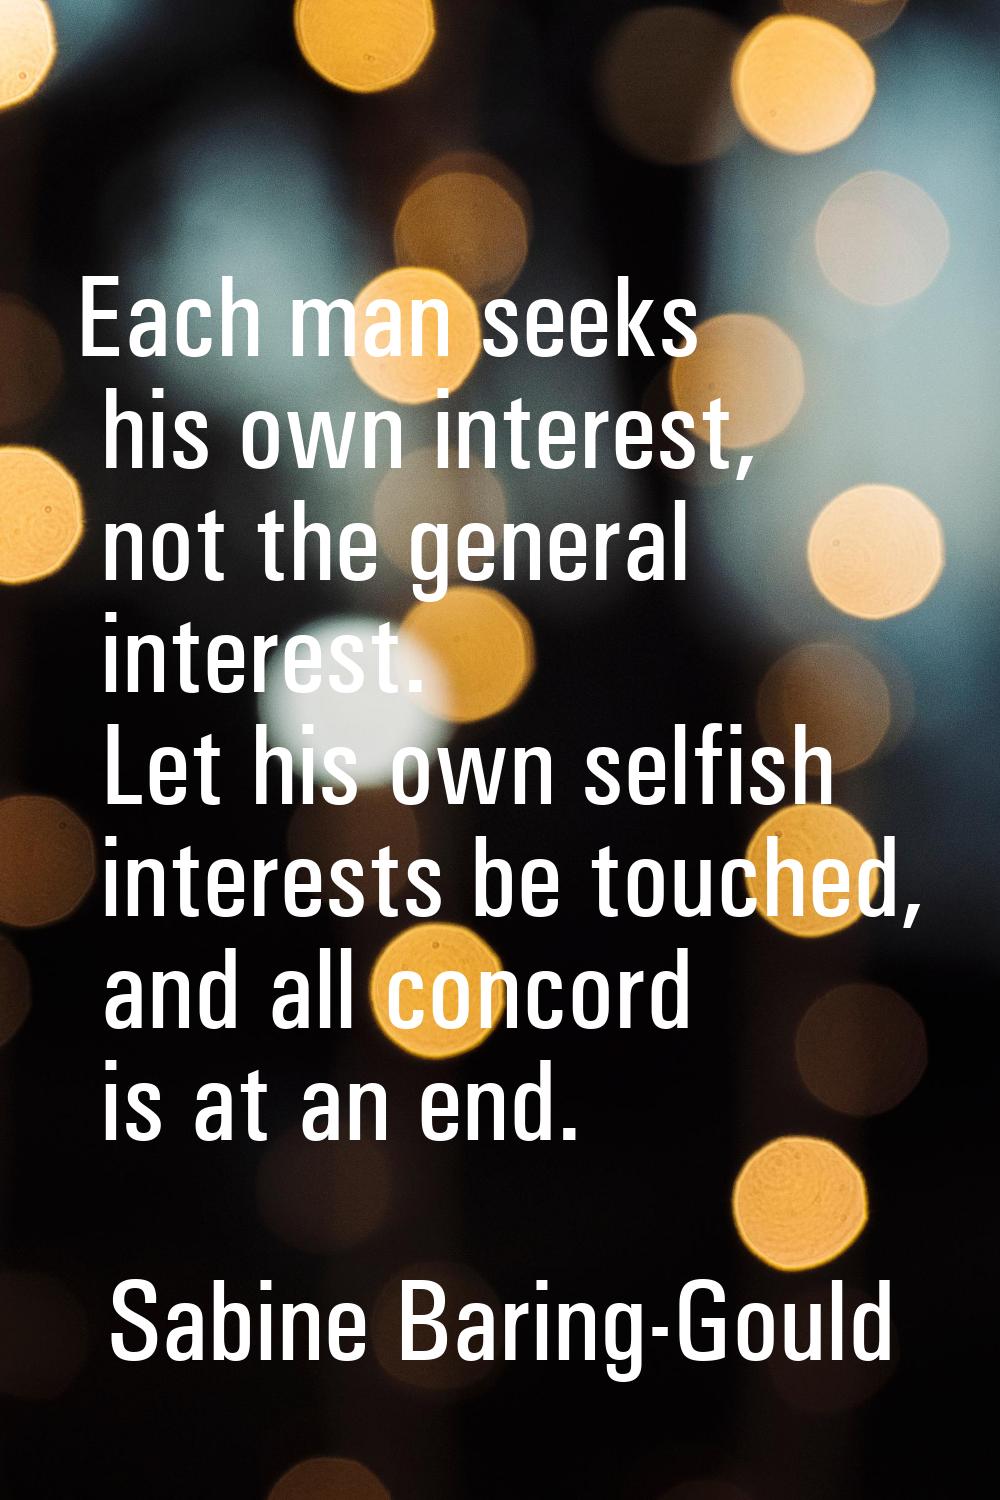 Each man seeks his own interest, not the general interest. Let his own selfish interests be touched